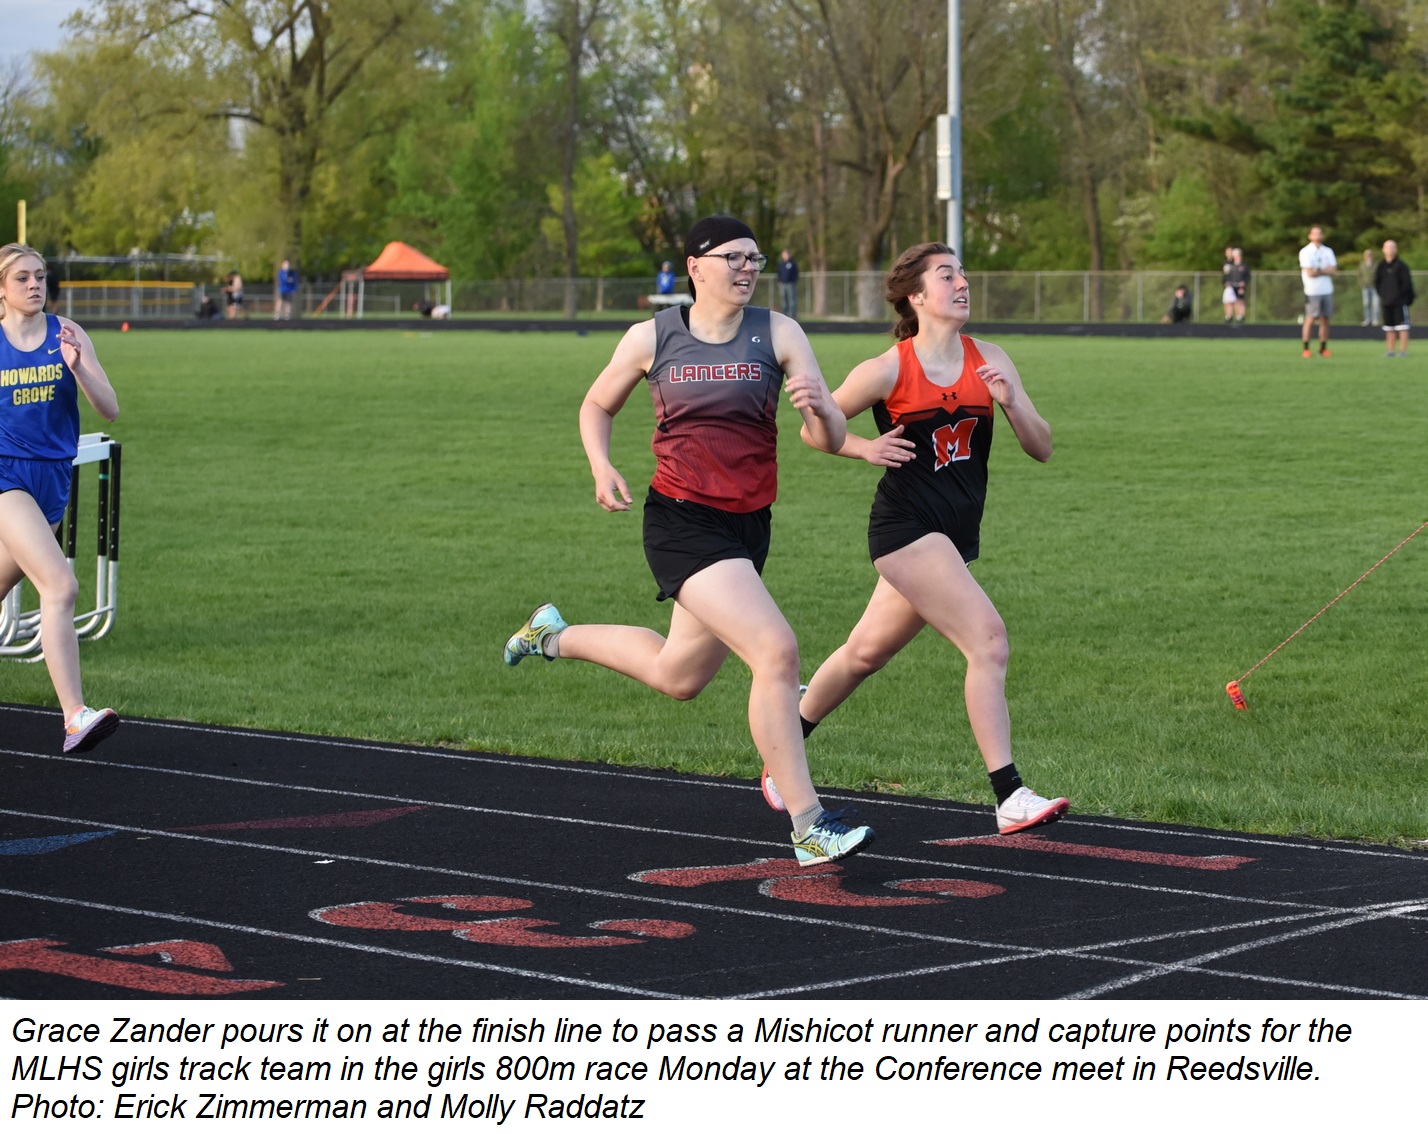 Grace Zander pours it on at the finish line to pass a Mishicot runner during the girls 800m race at the Conference Meet in Reedsville.